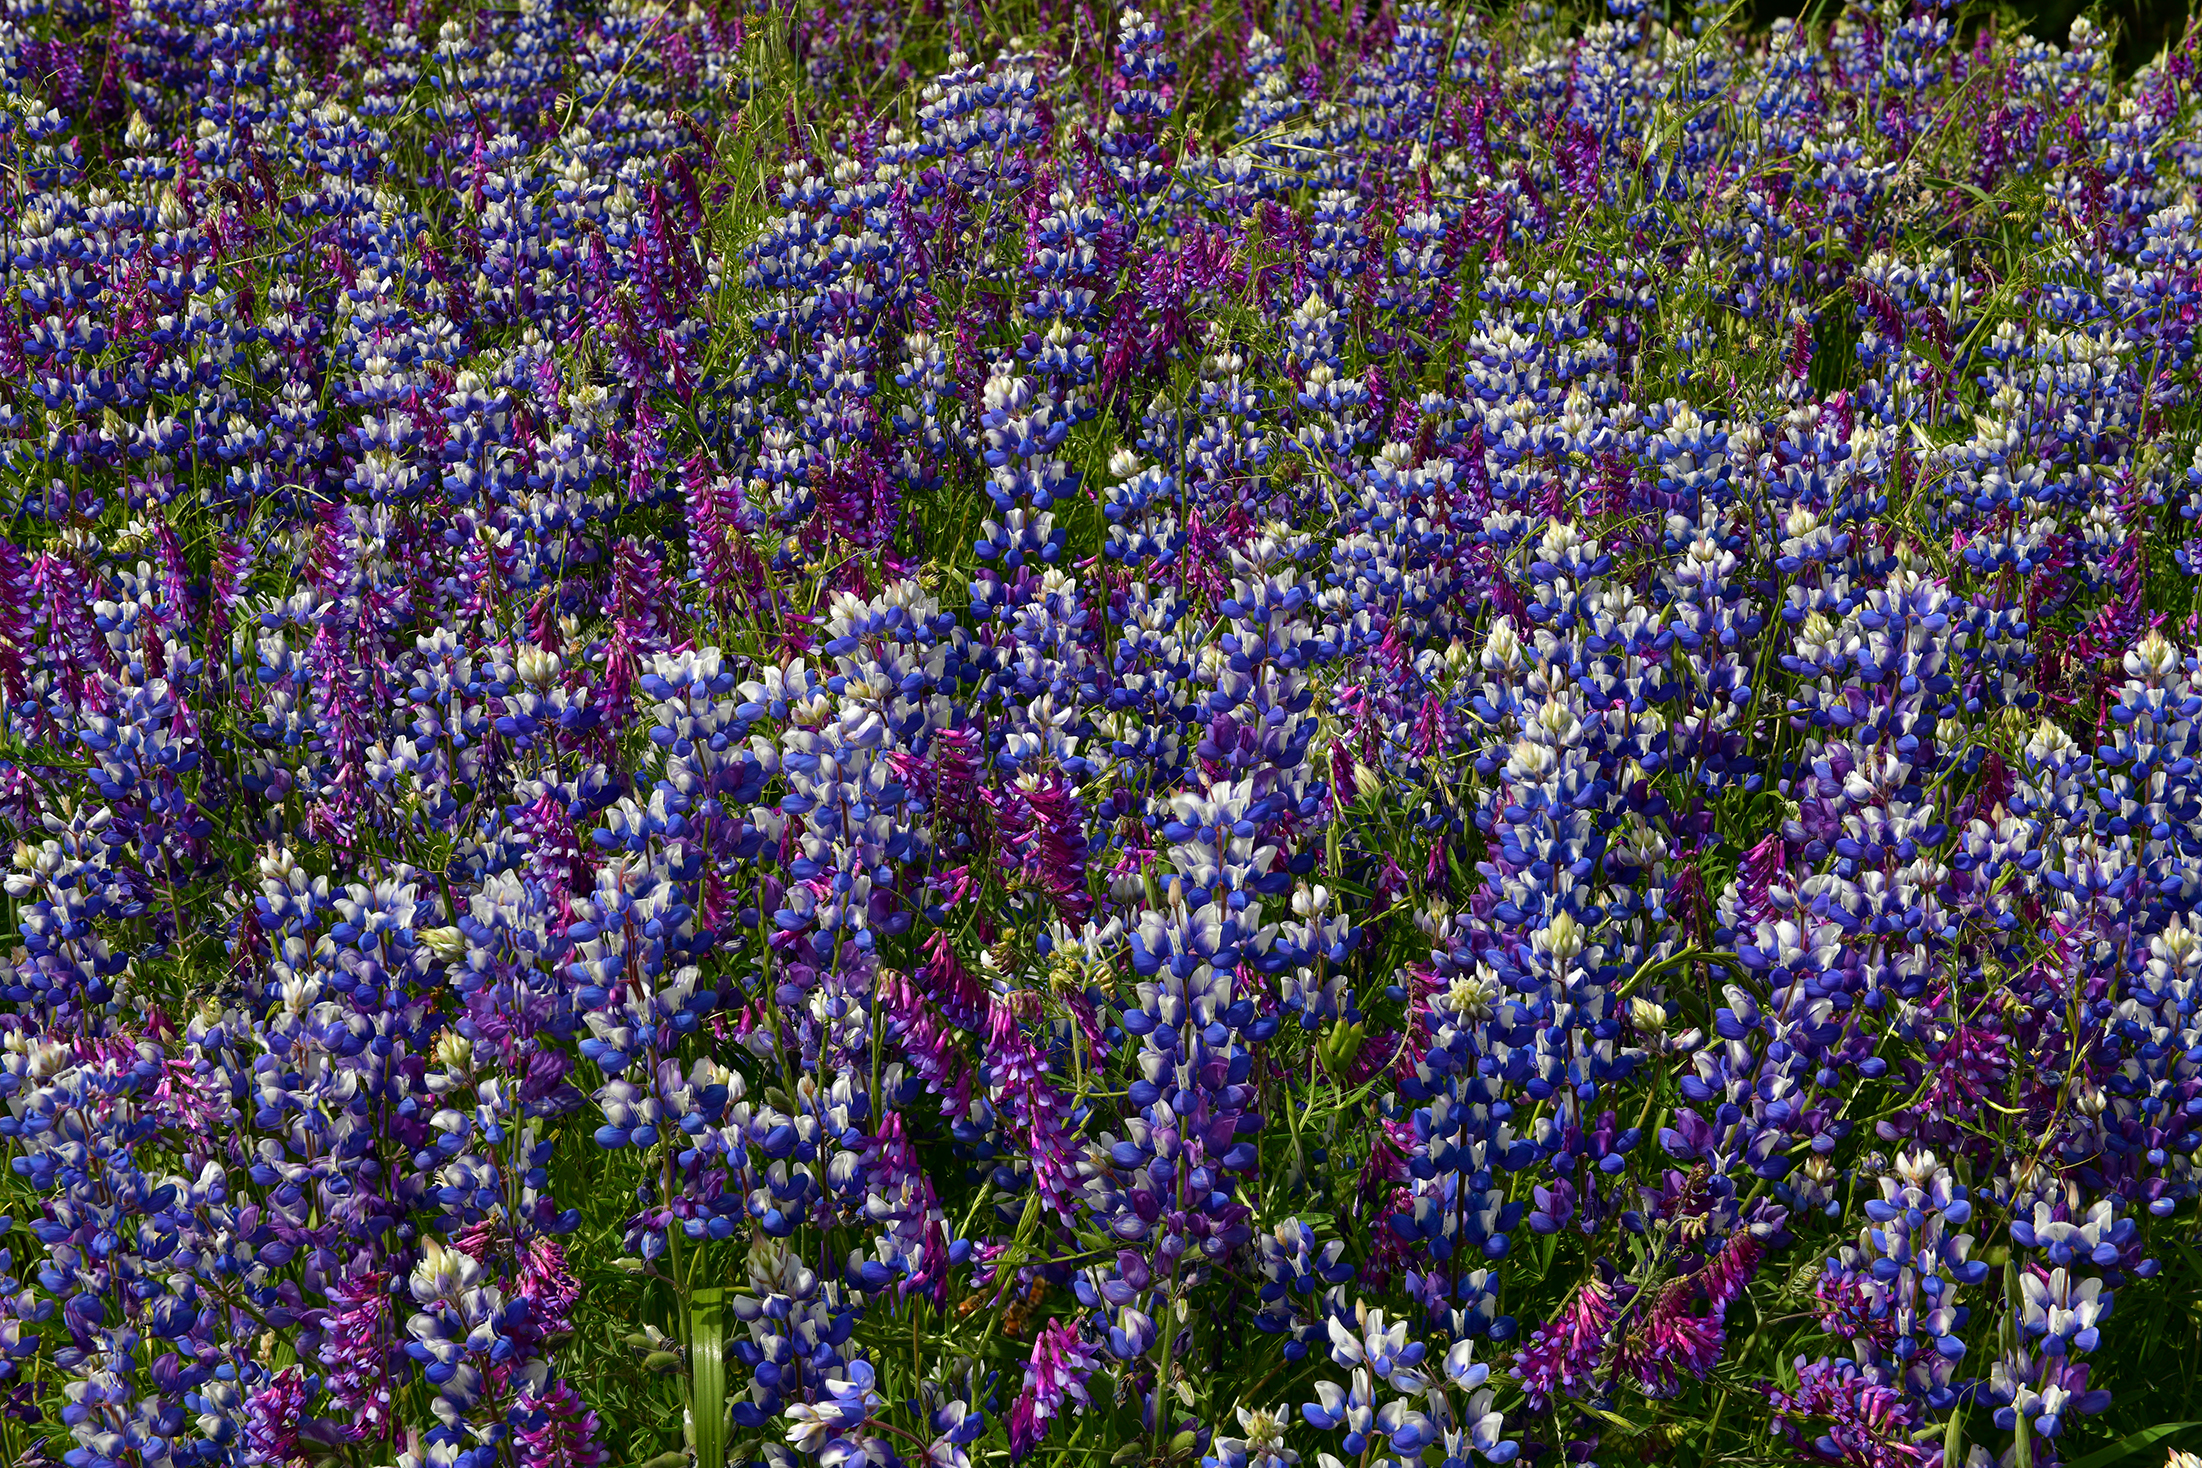 CA - Paso Robles Lupine and Vetch Wildflowers.jpg